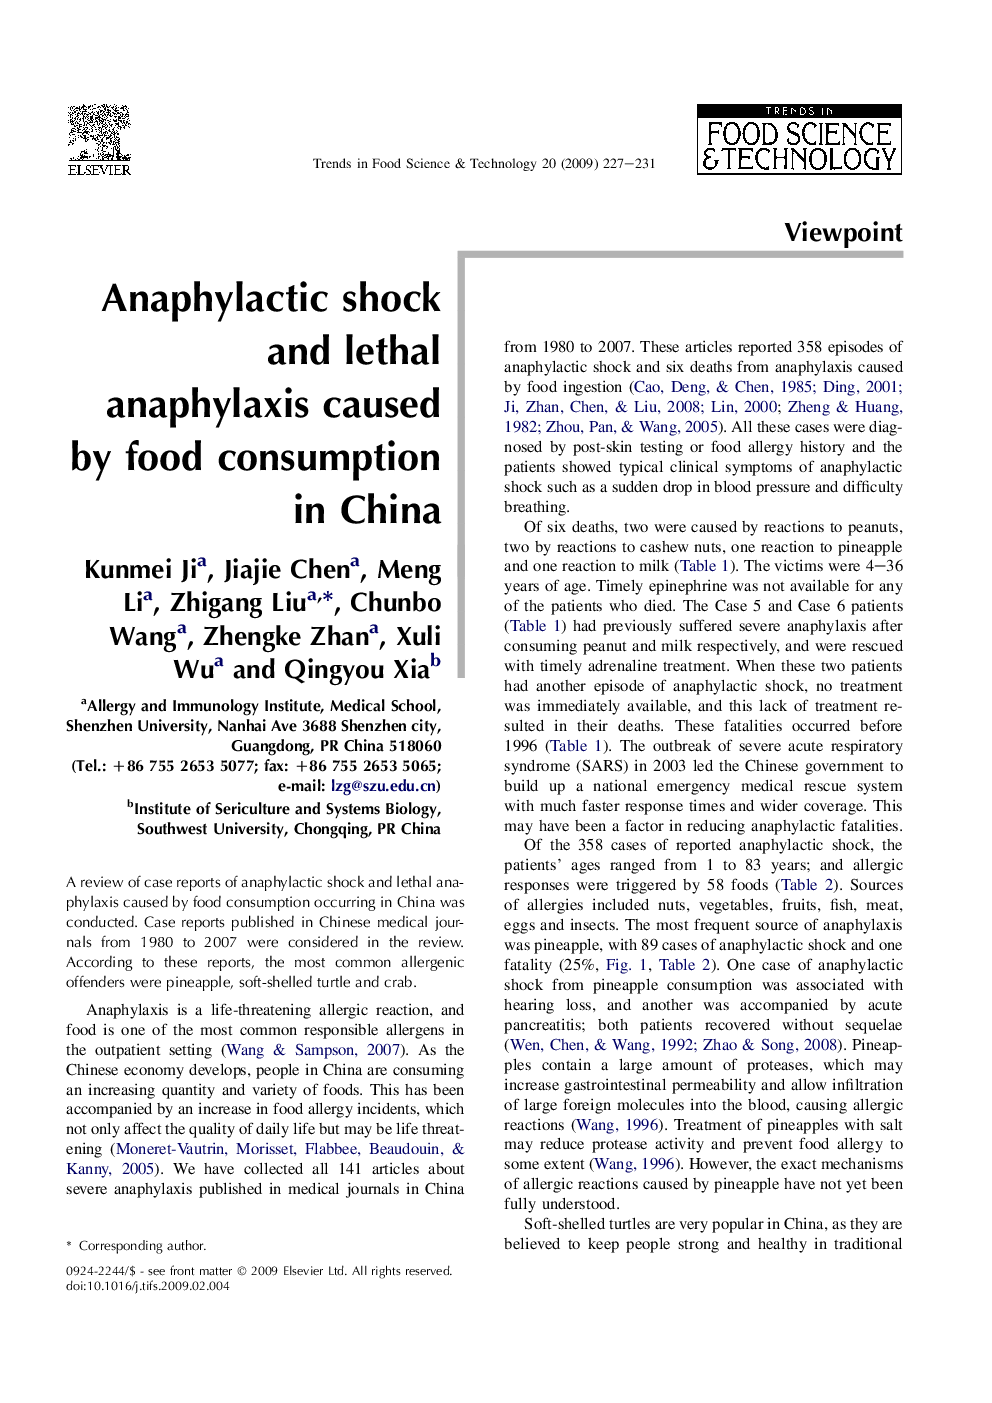 Anaphylactic shock and lethal anaphylaxis caused by food consumption in China